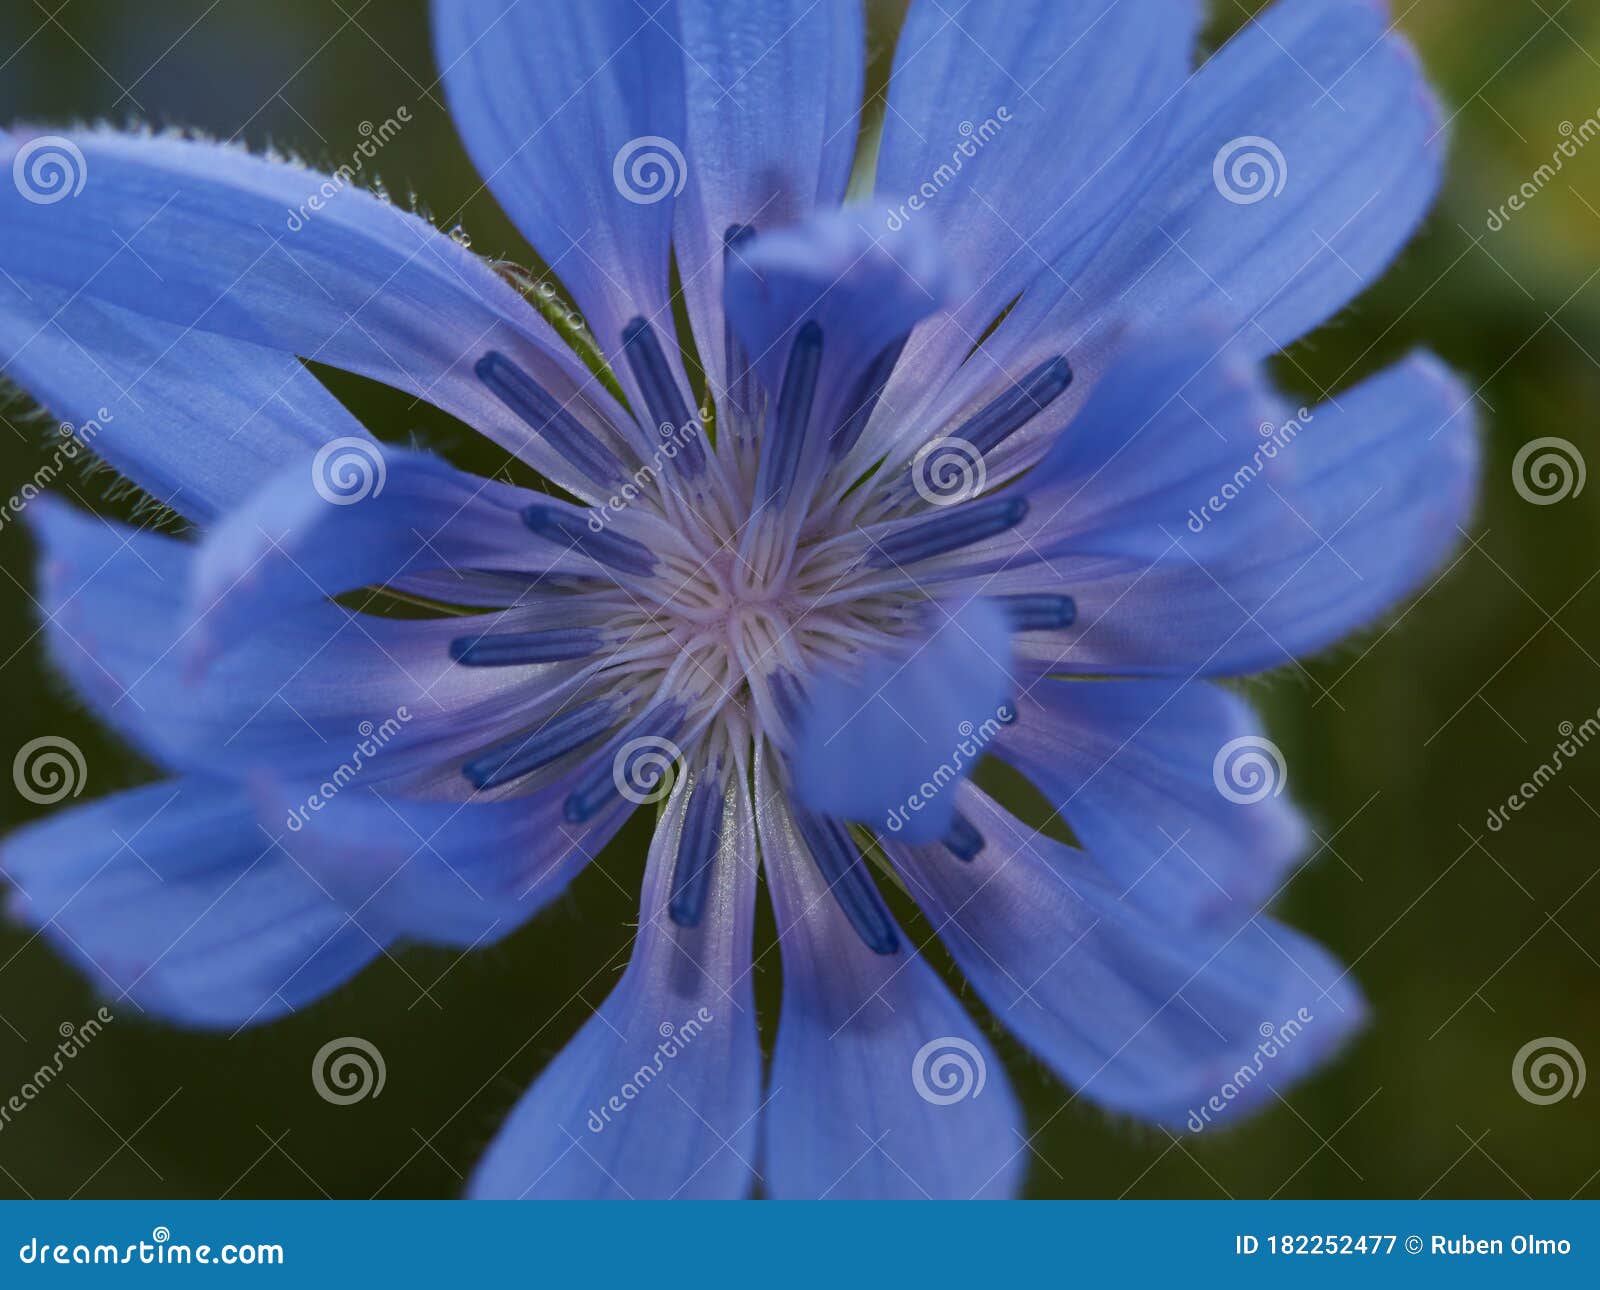 Blue Flower Images  Free HD Backgrounds PNGs Vector Graphics  Illustrations  Templates  rawpixel